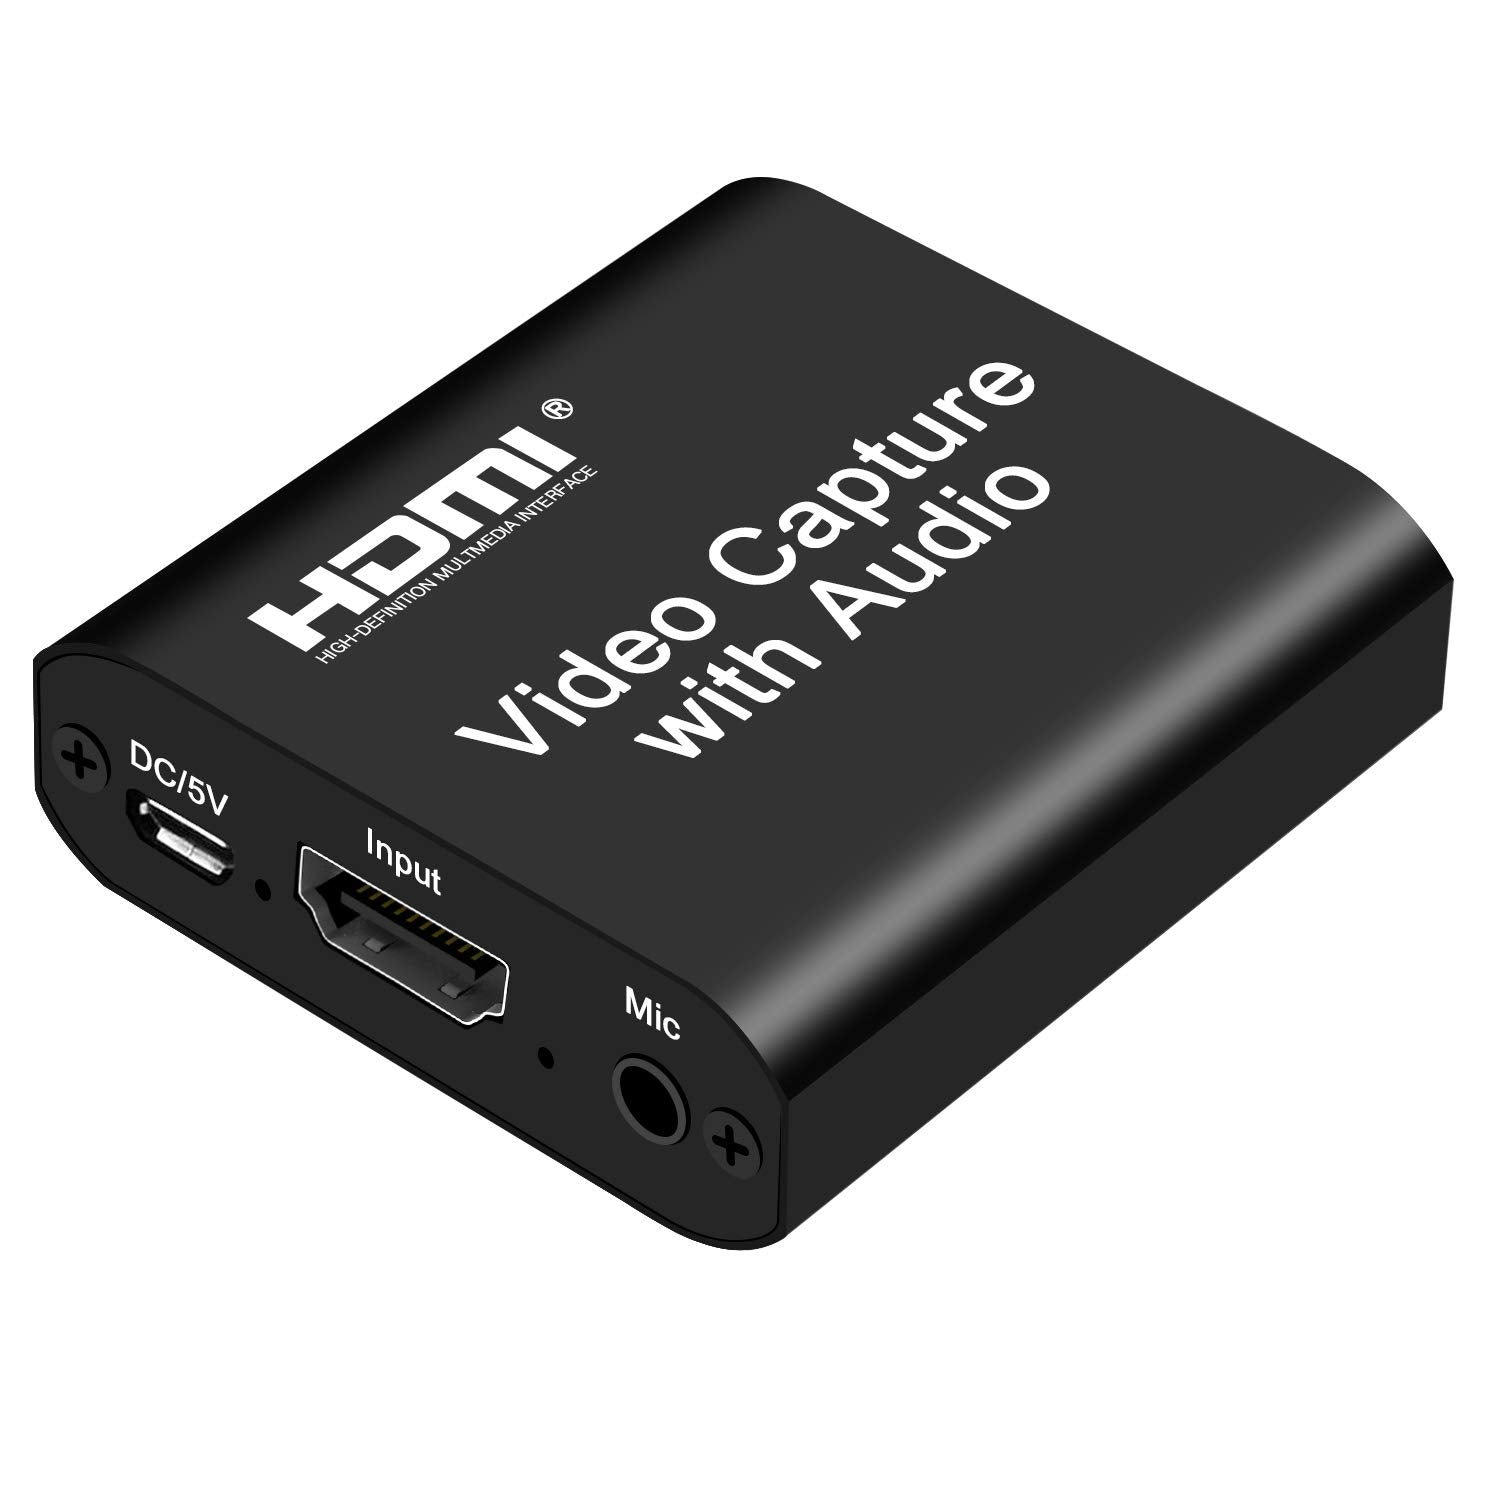 DIGITNOW Audio Video HDMI Capture Card with Loop Out, USB 2.0 4K HD 1080P 60FPS HDMI Video Game Capture Card for Live Streaming for PS3/ PS4 /Xbox One/DSLR/Camcorders/Action Cam